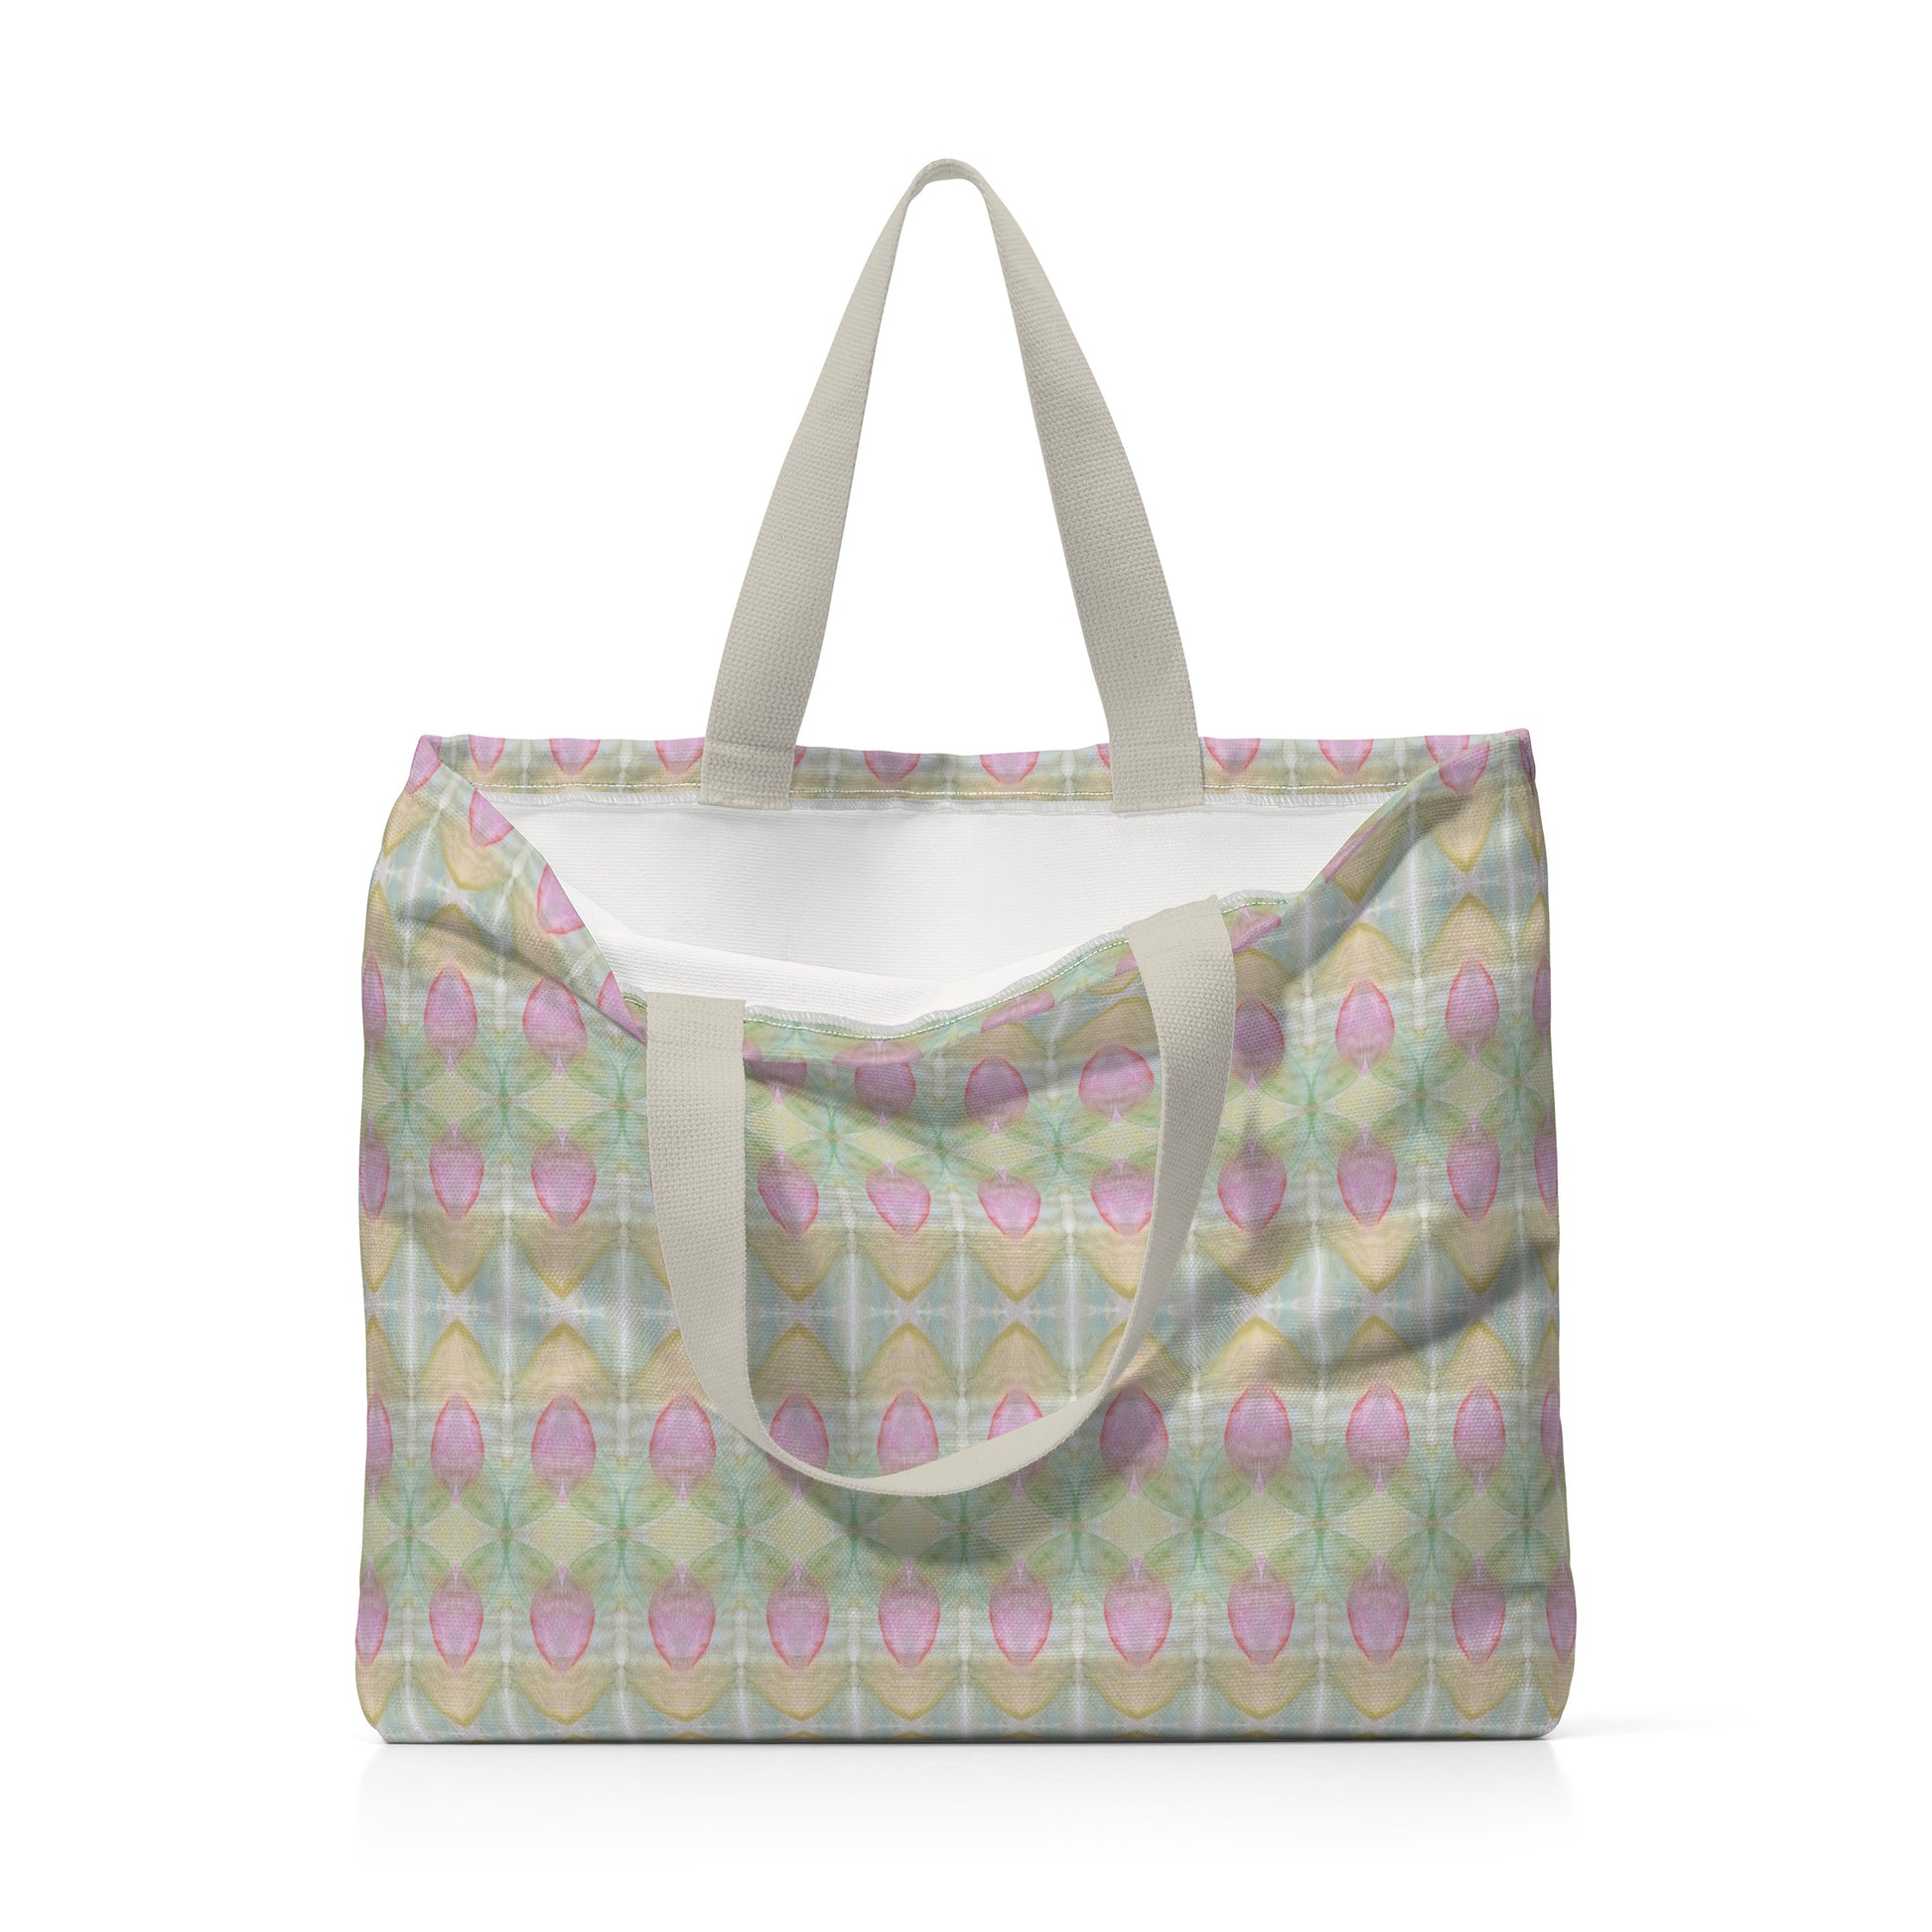 Canvas tote bag featuring a multicolored pastel abstract floral design